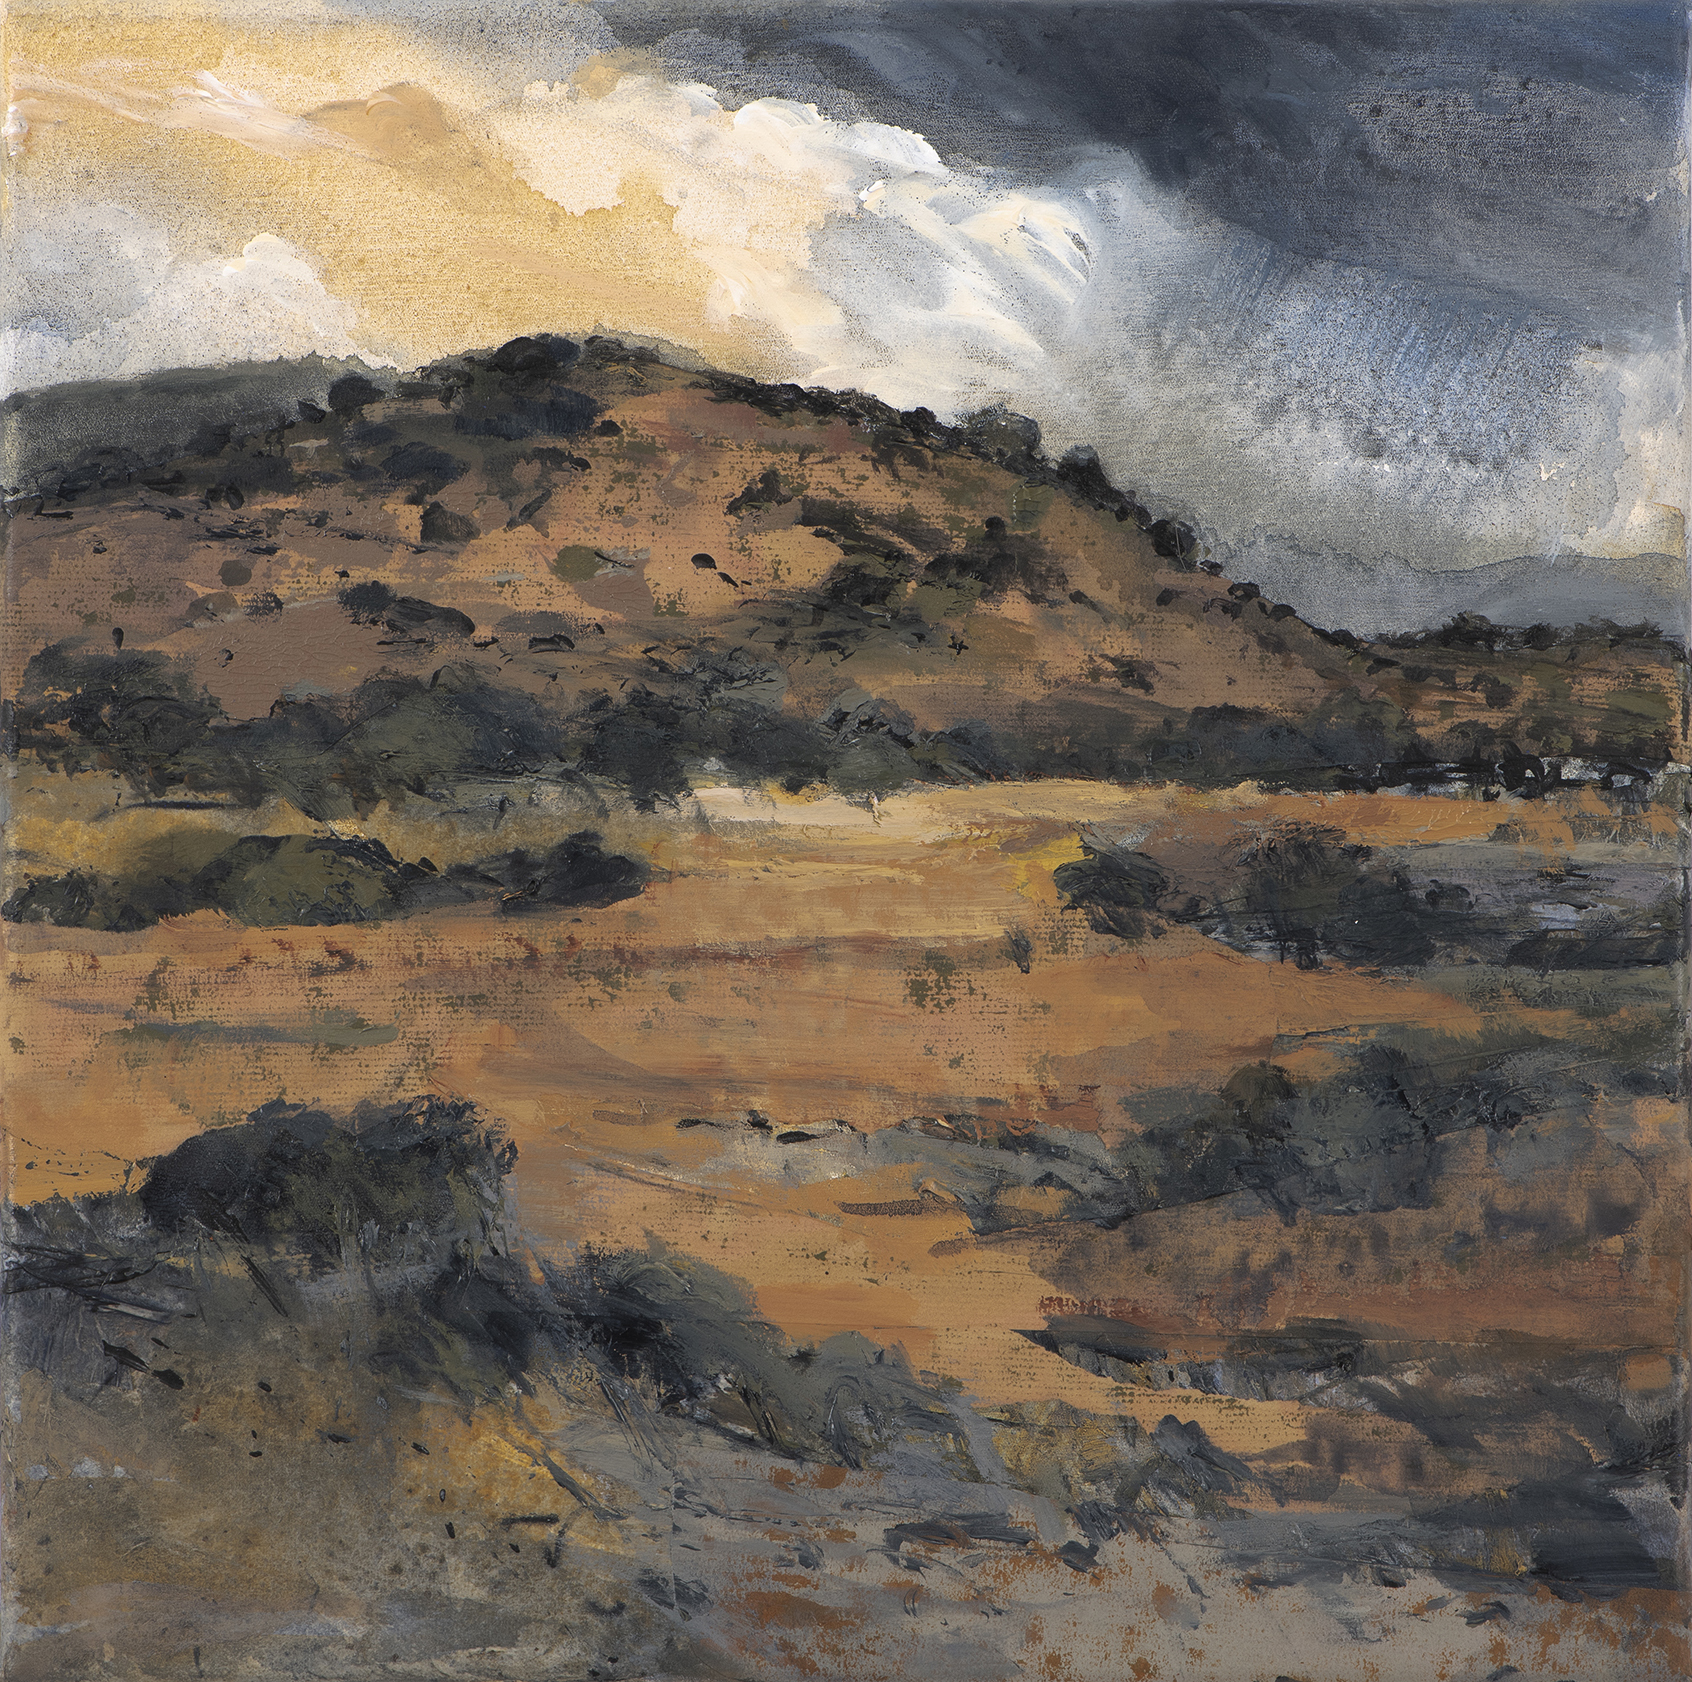 Judith White 'Western Plains (Study) 2' acrylic and collage on canvas 40 x 40cm $2,900